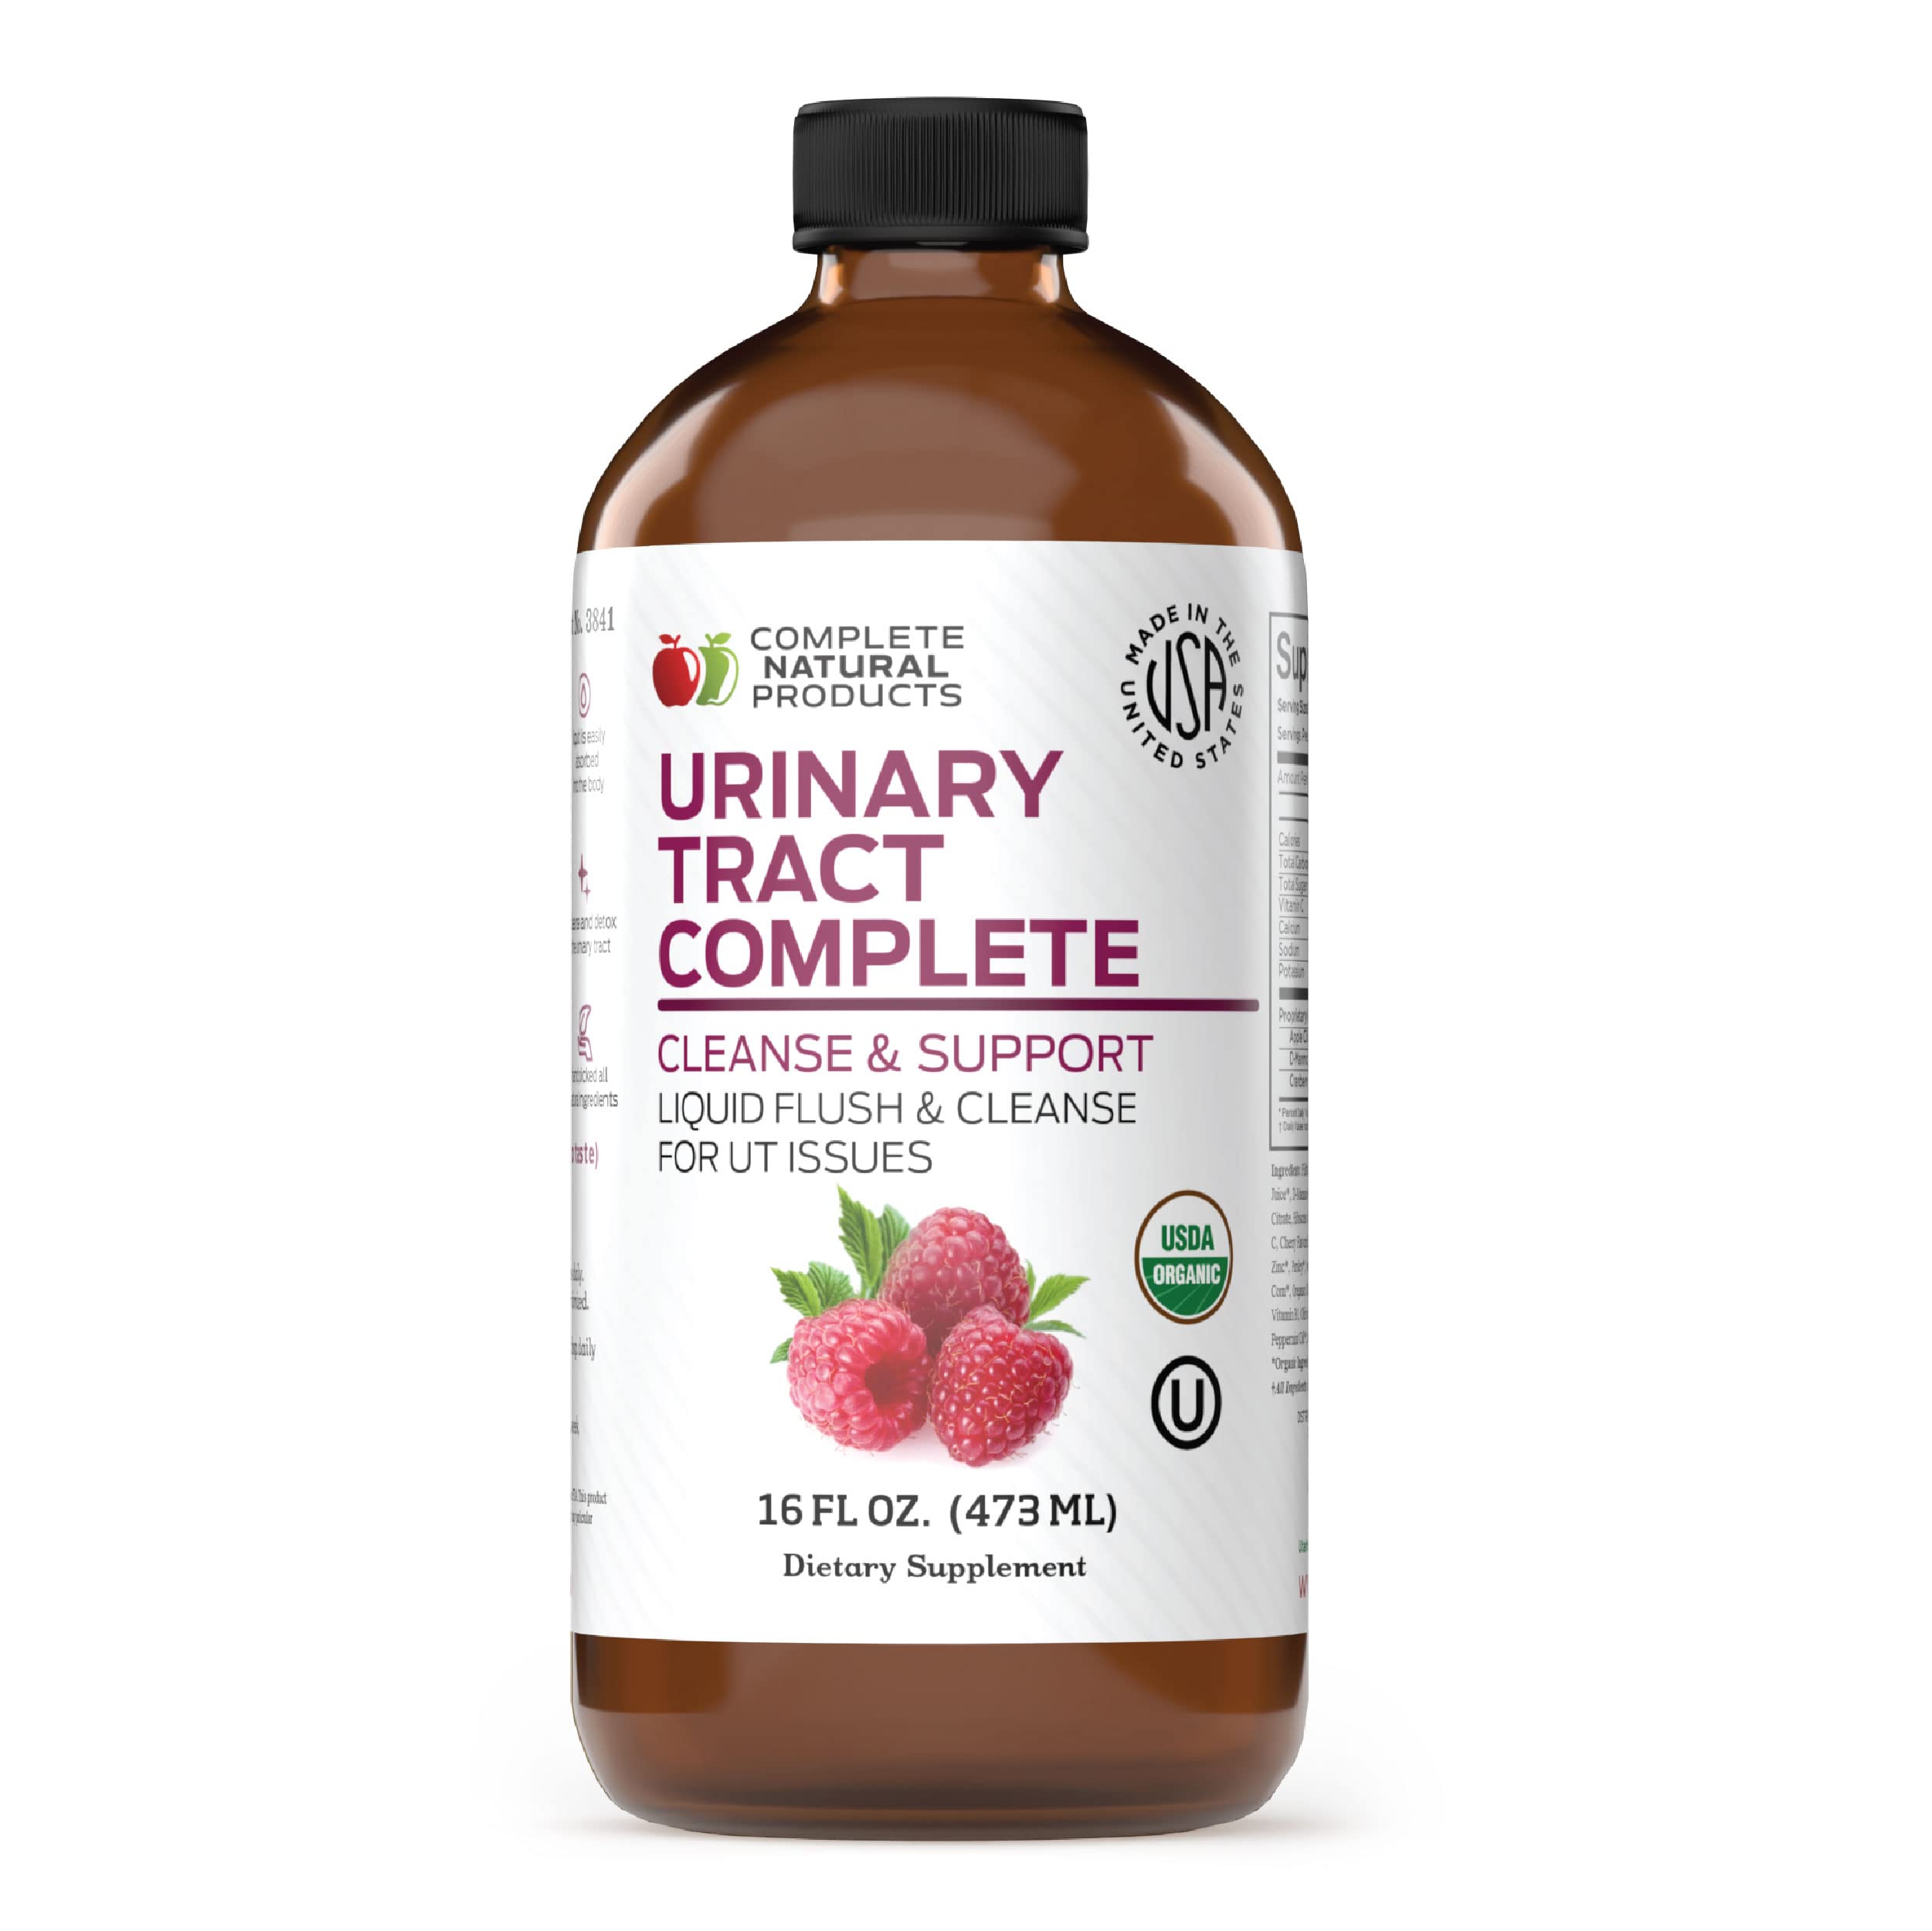 Urinary Tract Complete 16oz Liquid Supplement with Organic Cranberry, D-Mannose, Beet Root, Fennel Seed, and Turmeric